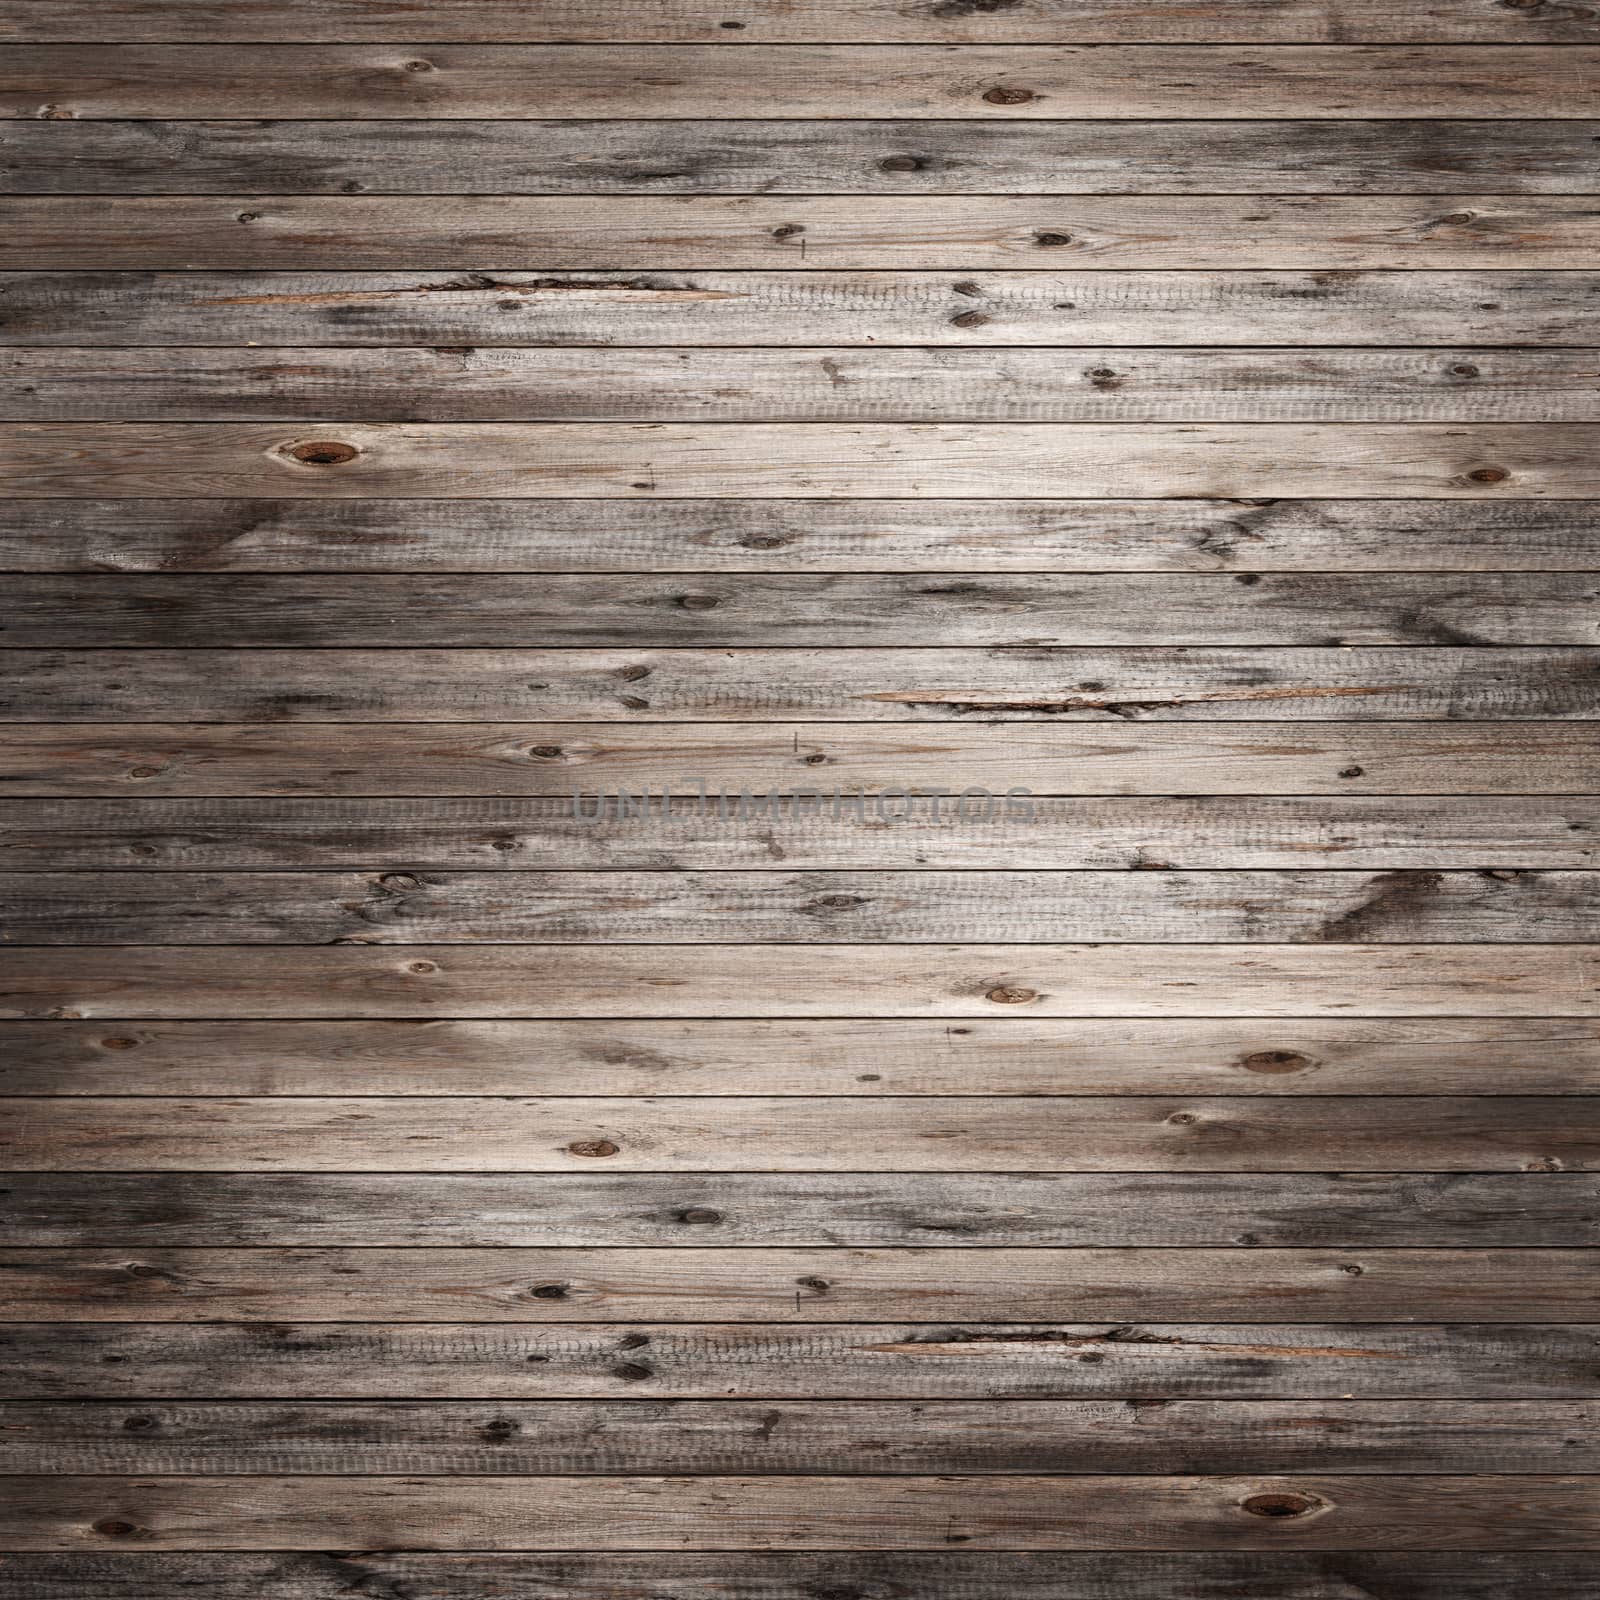 Grungy wooden background.  by szefei